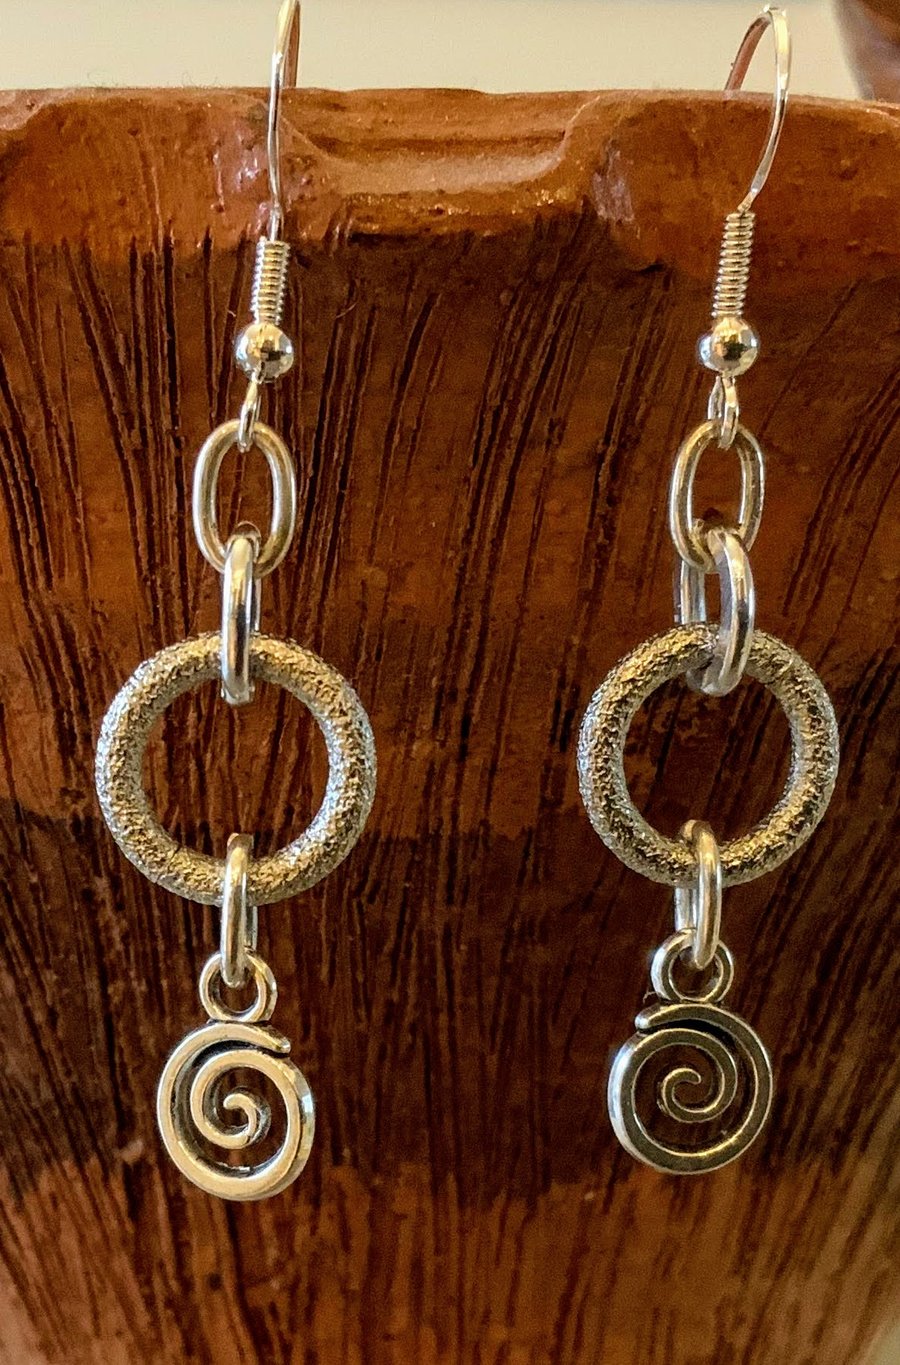 Metal frosted loop earrings with spiral charms